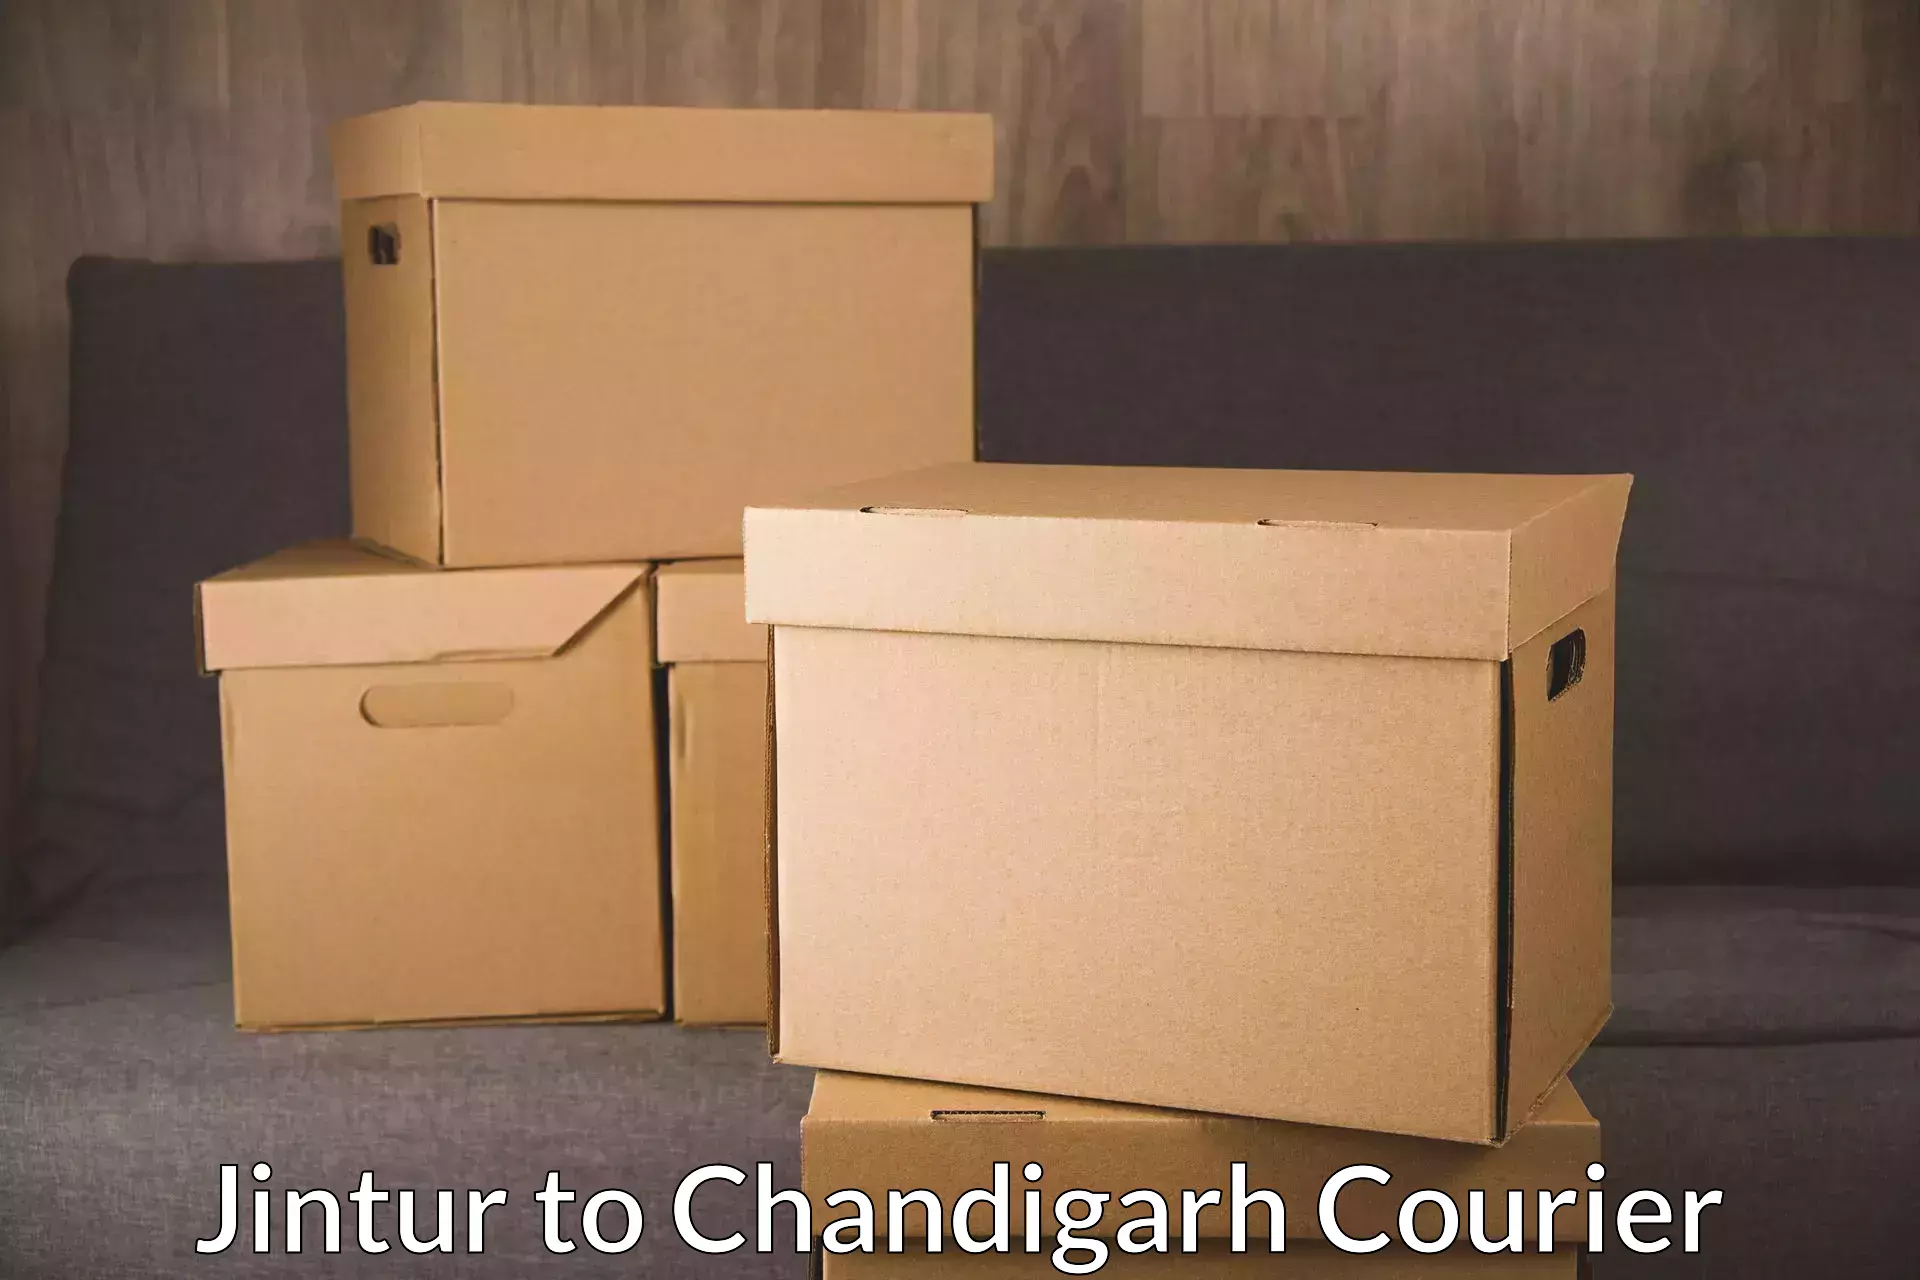 Cash on delivery service Jintur to Chandigarh